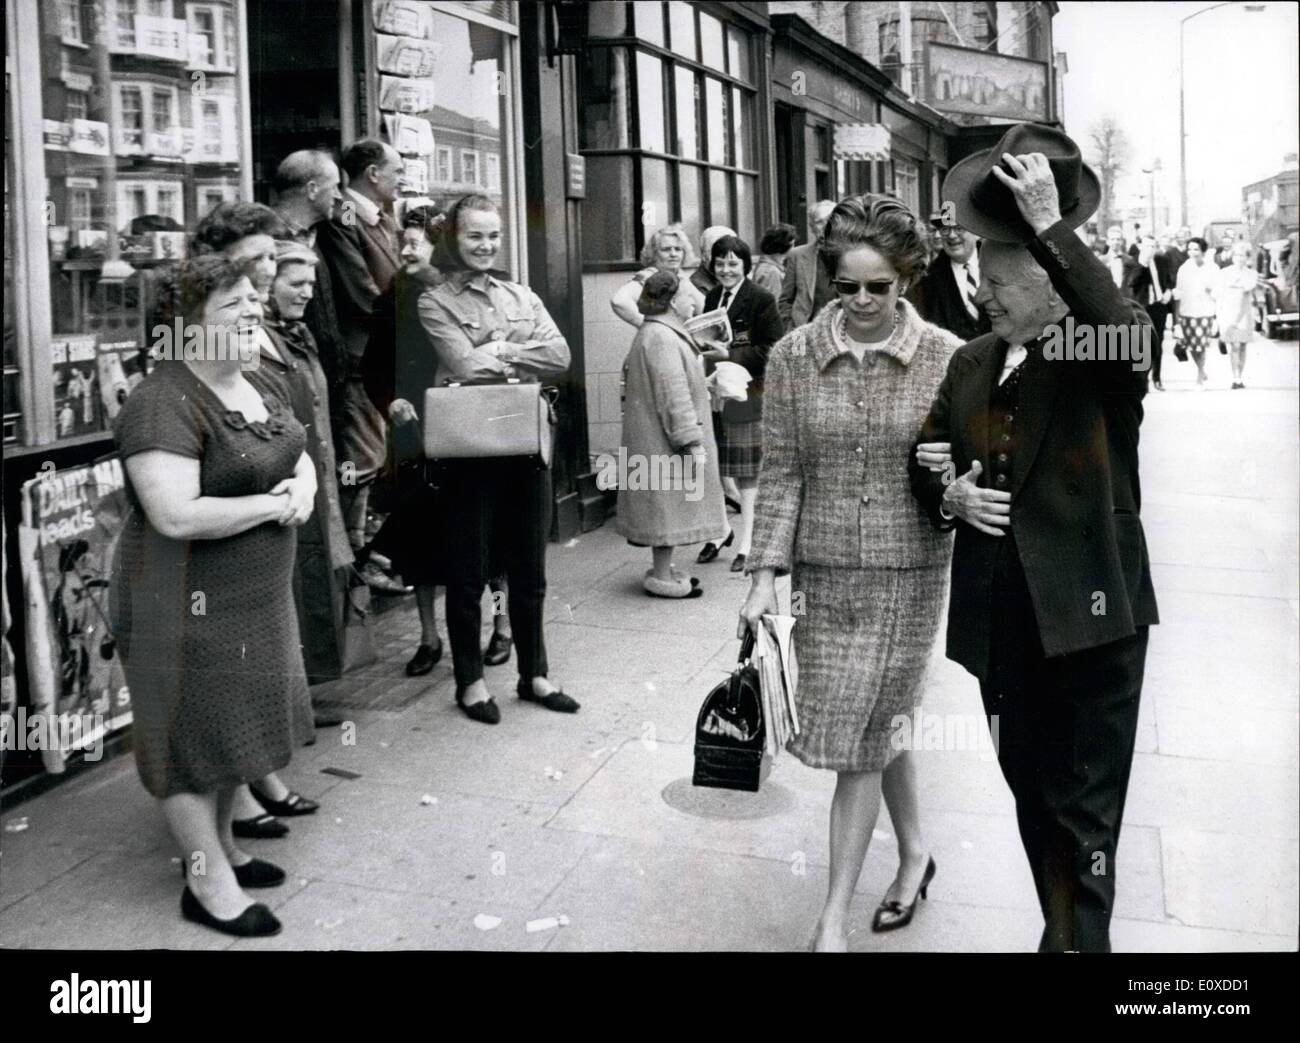 May 05, 1966 - Charlie Chaplin in the old Kent Road: Charlie Chaplin finished shooting his new picture ''A Countess from Hong Kong'' yesterday did so only a short way from the place in Southwark, London, where the Chaplin birth place in East Street. Mr. Chaplin did not visit. He has done so already alone. Photo shows Charlie Chaplin, with his wife, Oona, acknowledging his welcome in London's old Kent Road yesterday. Stock Photo